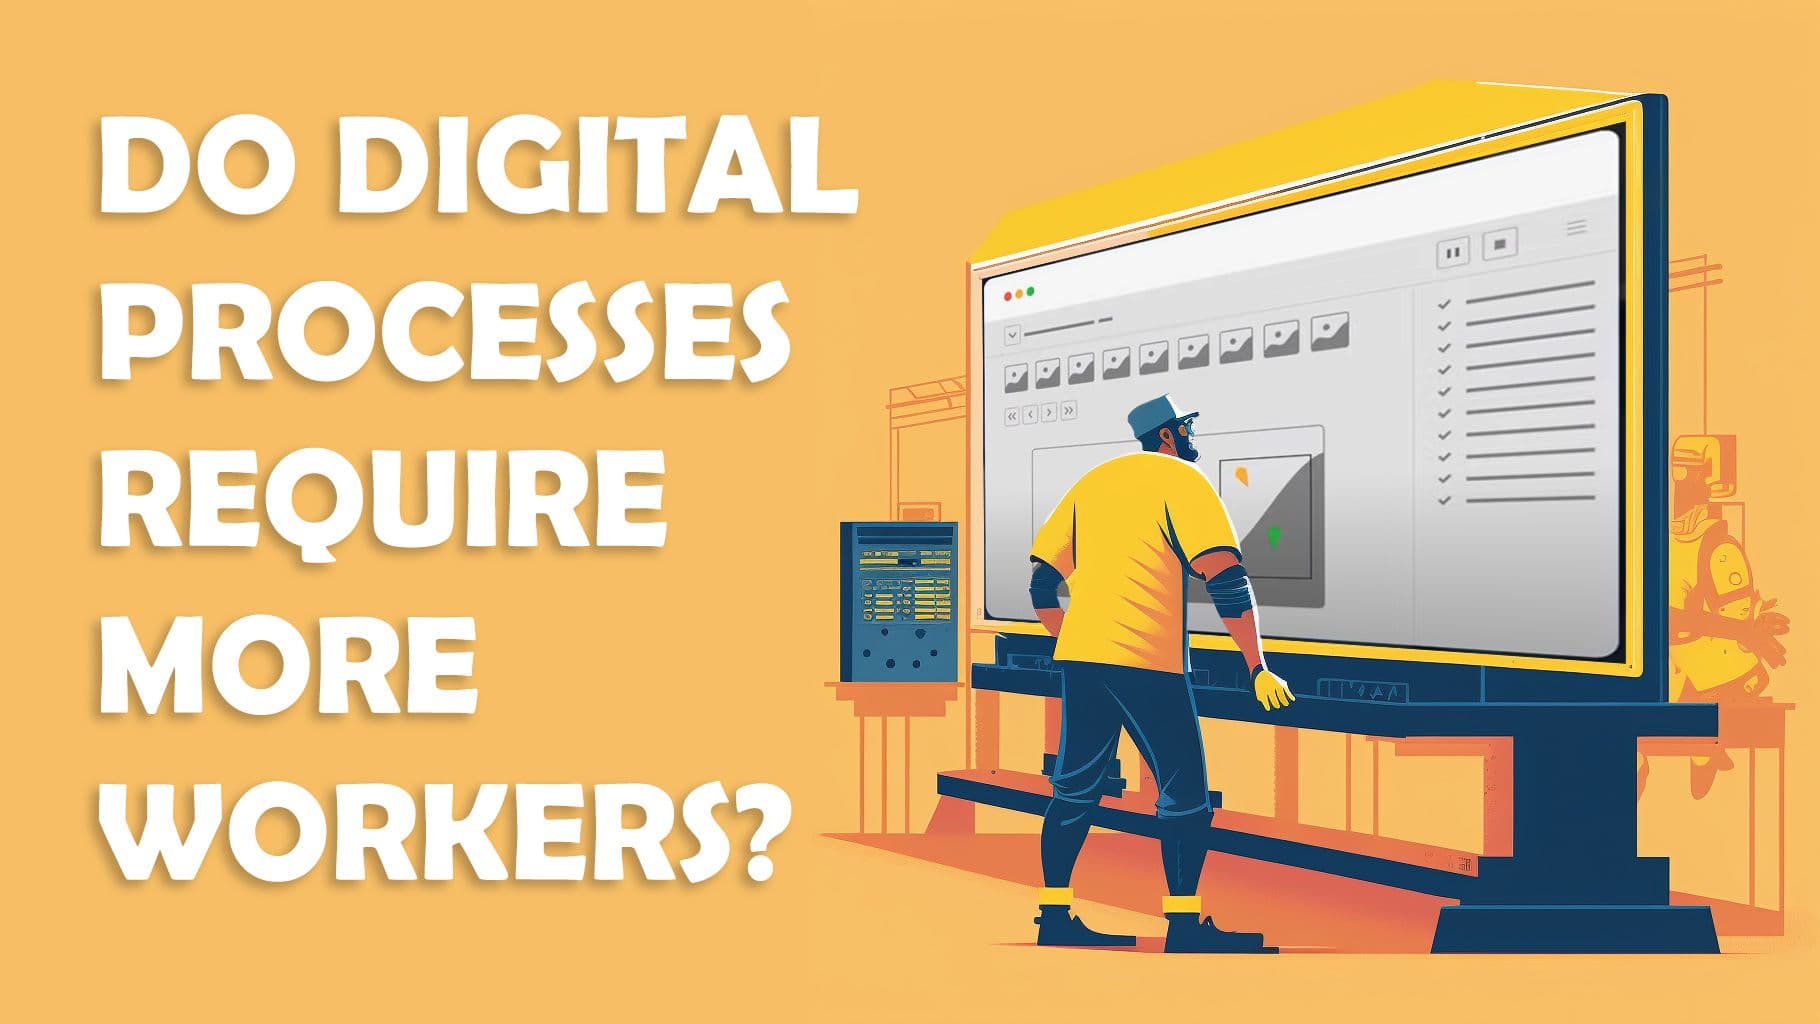 Do Digital Processes Need More Workers?